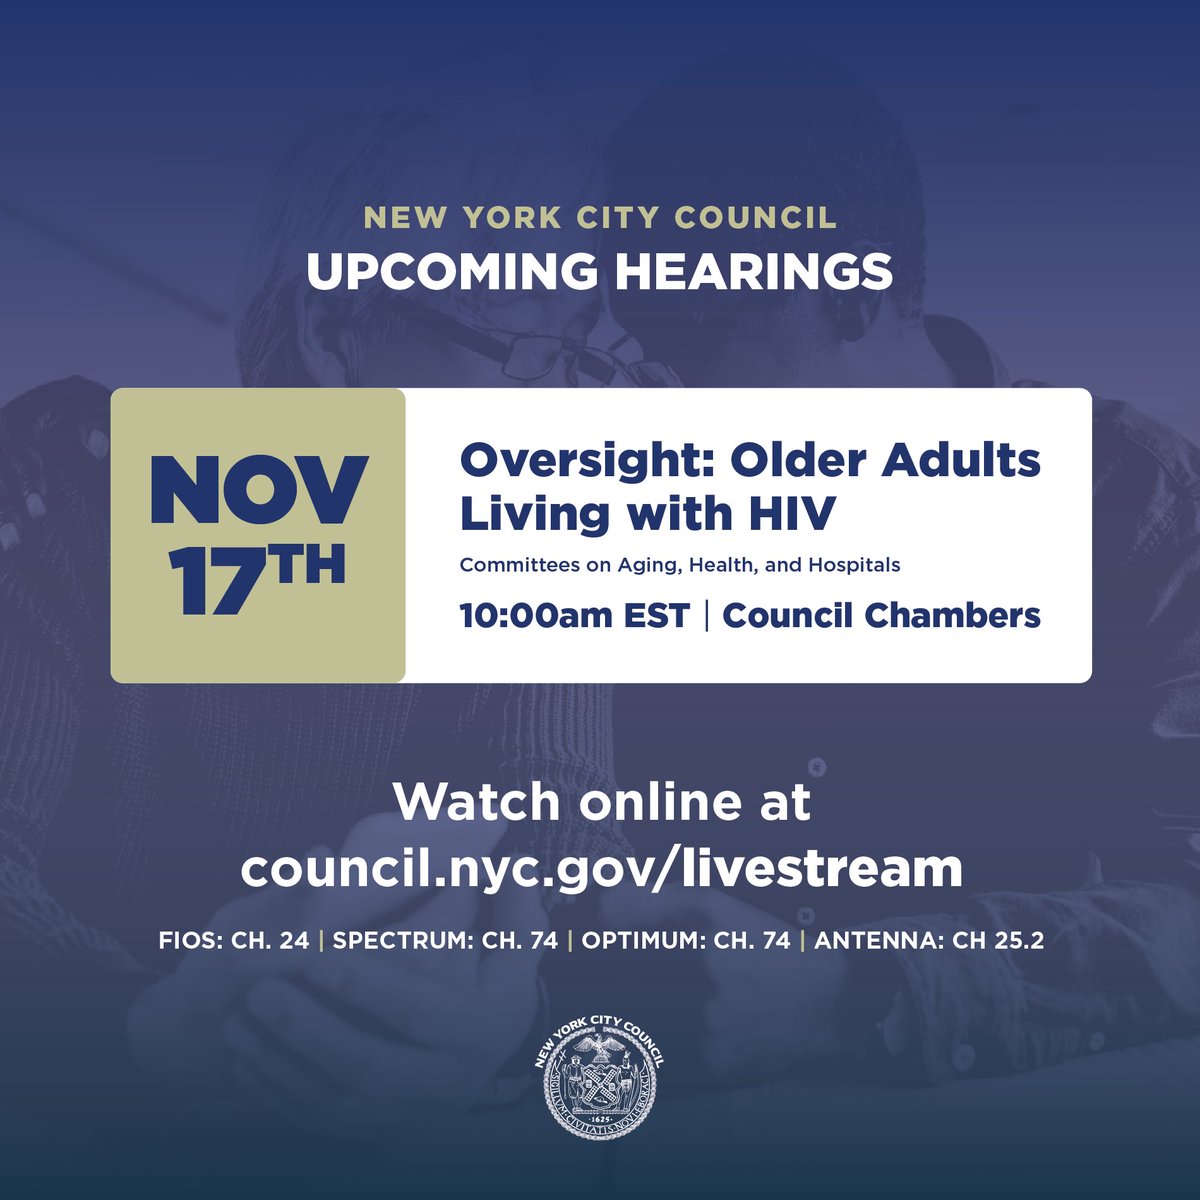 Coming up tomorrow at 10am: The Committees on Aging, Health, and Hospitals will hold an oversight hearing on the health and social conditions of older adults living with HIV/AIDS. 📺 Watch live: council.nyc.gov/livestream/